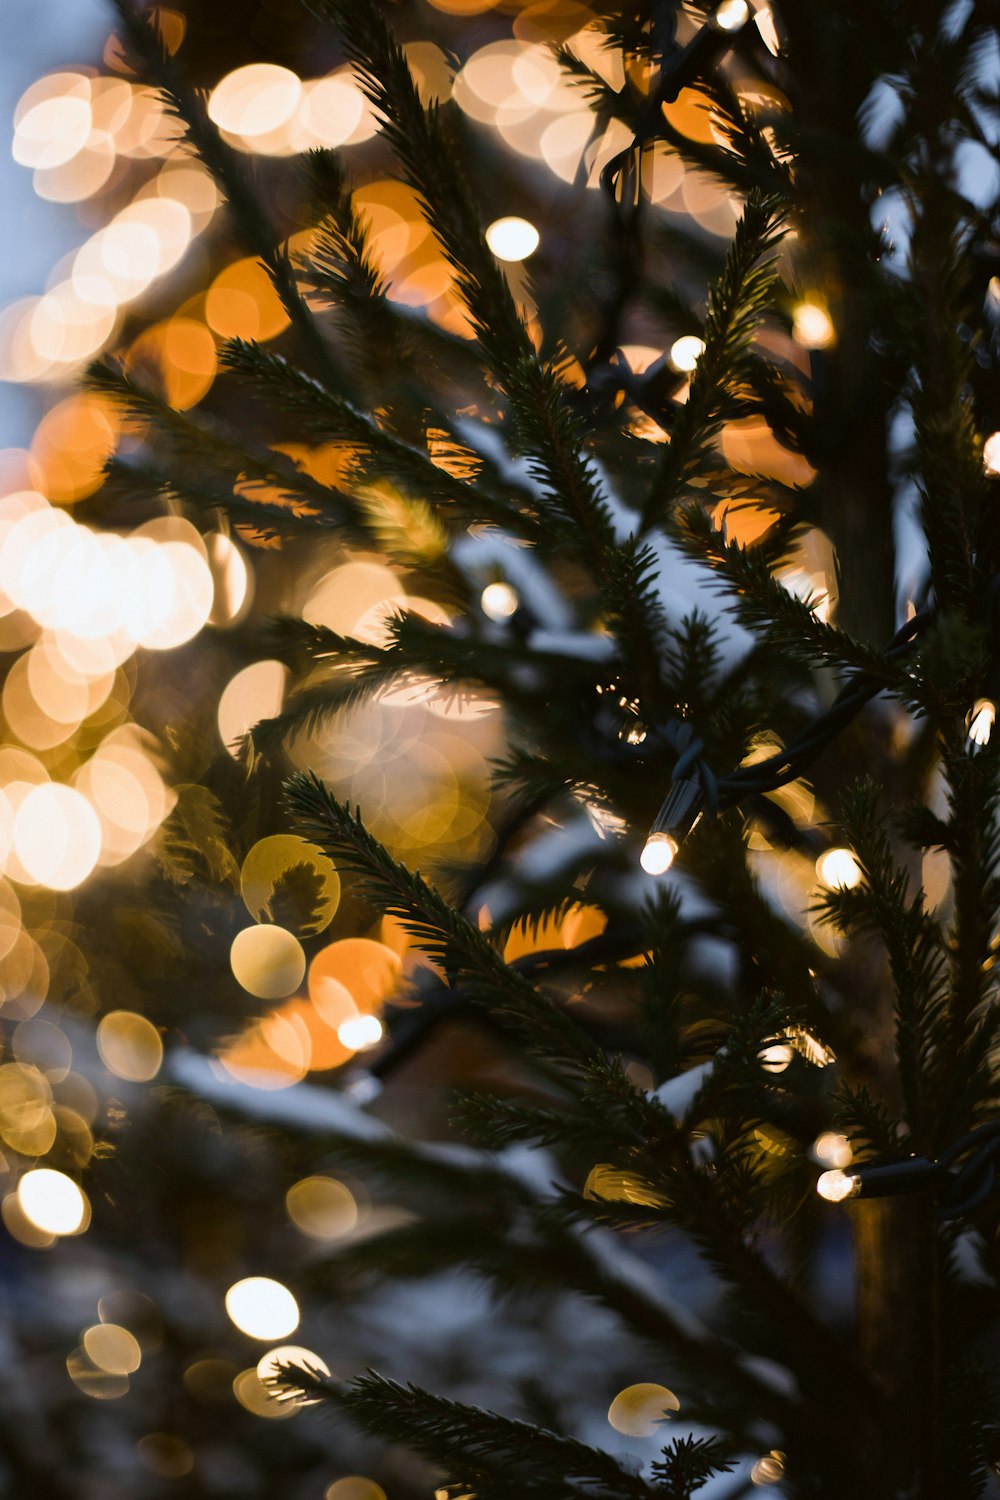 a close up of a pine tree with lights in the background